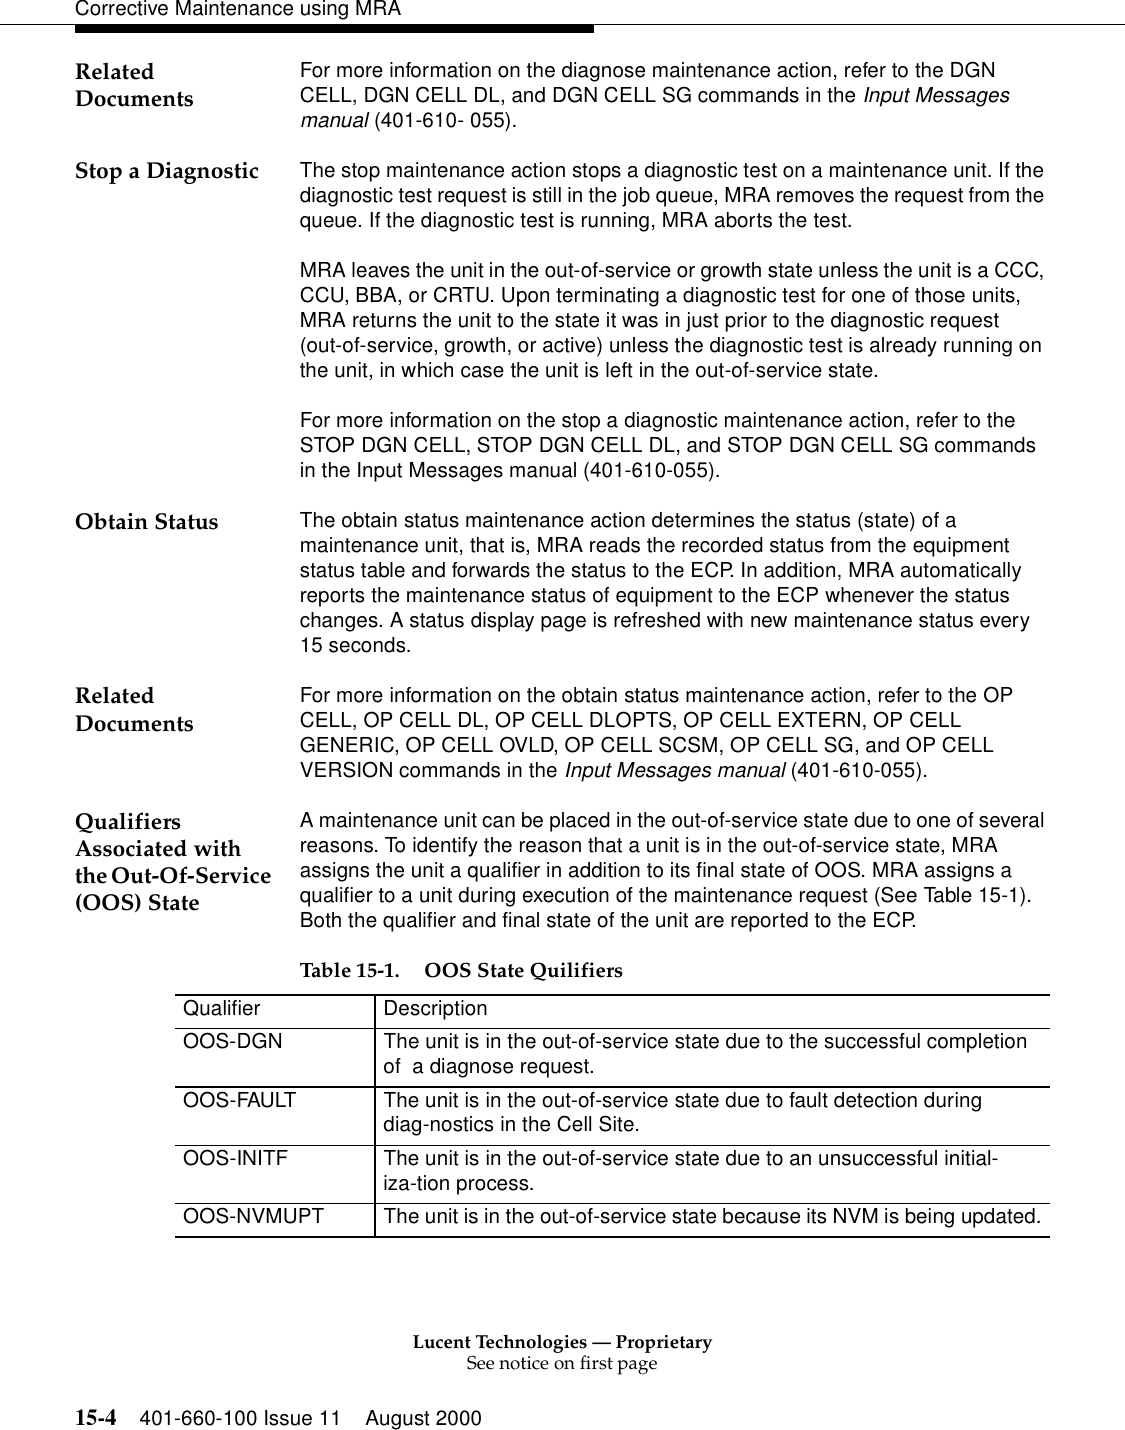 Lucent Technologies — ProprietarySee notice on first page15-4 401-660-100 Issue 11 August 2000Corrective Maintenance using MRARelated Documents For more information on the diagnose maintenance action, refer to the DGN CELL, DGN CELL DL, and DGN CELL SG commands in the Input Messages manual (401-610- 055). Stop a Diagnostic The stop maintenance action stops a diagnostic test on a maintenance unit. If the diagnostic test request is still in the job queue, MRA removes the request from the queue. If the diagnostic test is running, MRA aborts the test. MRA leaves the unit in the out-of-service or growth state unless the unit is a CCC, CCU, BBA, or CRTU. Upon terminating a diagnostic test for one of those units, MRA returns the unit to the state it was in just prior to the diagnostic request (out-of-service, growth, or active) unless the diagnostic test is already running on the unit, in which case the unit is left in the out-of-service state. For more information on the stop a diagnostic maintenance action, refer to the STOP DGN CELL, STOP DGN CELL DL, and STOP DGN CELL SG commands in the Input Messages manual (401-610-055). Obtain Status The obtain status maintenance action determines the status (state) of a maintenance unit, that is, MRA reads the recorded status from the equipment status table and forwards the status to the ECP. In addition, MRA automatically reports the maintenance status of equipment to the ECP whenever the status changes. A status display page is refreshed with new maintenance status every 15 seconds. Related Documents For more information on the obtain status maintenance action, refer to the OP CELL, OP CELL DL, OP CELL DLOPTS, OP CELL EXTERN, OP CELL GENERIC, OP CELL OVLD, OP CELL SCSM, OP CELL SG, and OP CELL VERSION commands in the Input Messages manual (401-610-055). Qualifiers Associated with the Out-Of-Service (OOS) StateA maintenance unit can be placed in the out-of-service state due to one of several reasons. To identify the reason that a unit is in the out-of-service state, MRA assigns the unit a qualifier in addition to its final state of OOS. MRA assigns a qualifier to a unit during execution of the maintenance request (See Table 15-1). Both the qualifier and final state of the unit are reported to the ECP.  Table 15-1. OOS State Quilifiers Qualifier DescriptionOOS-DGN The unit is in the out-of-service state due to the successful completion of  a diagnose request.OOS-FAULT The unit is in the out-of-service state due to fault detection during diag-nostics in the Cell Site.OOS-INITF The unit is in the out-of-service state due to an unsuccessful initial-iza-tion process.OOS-NVMUPT The unit is in the out-of-service state because its NVM is being updated.